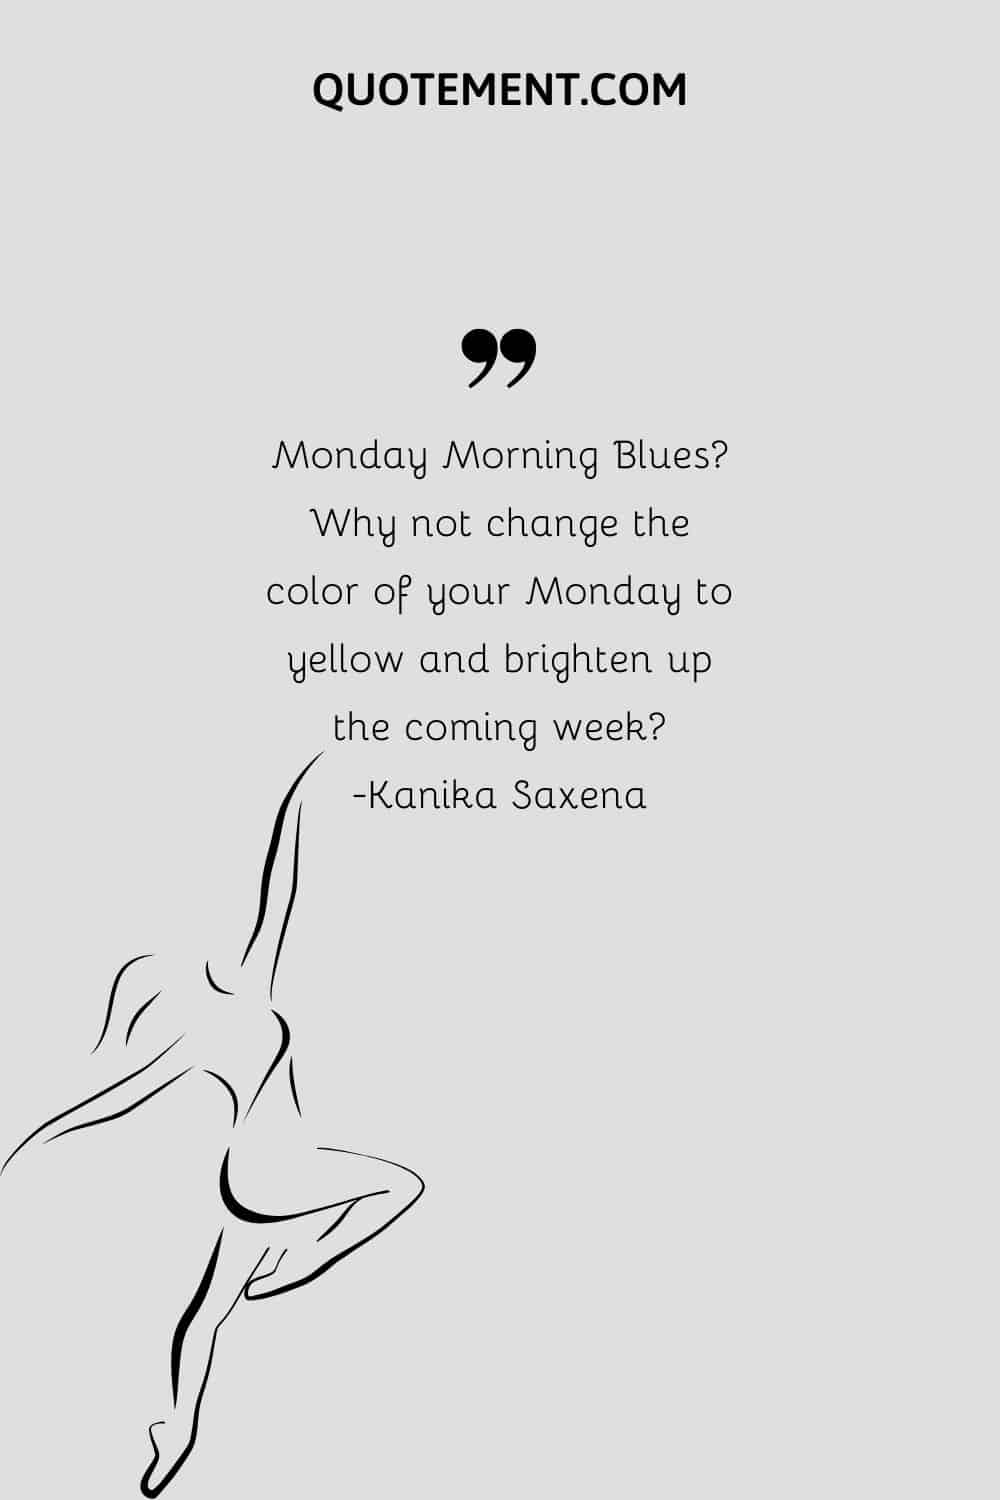 Why not change the color of your Monday to yellow and brighten up the coming week